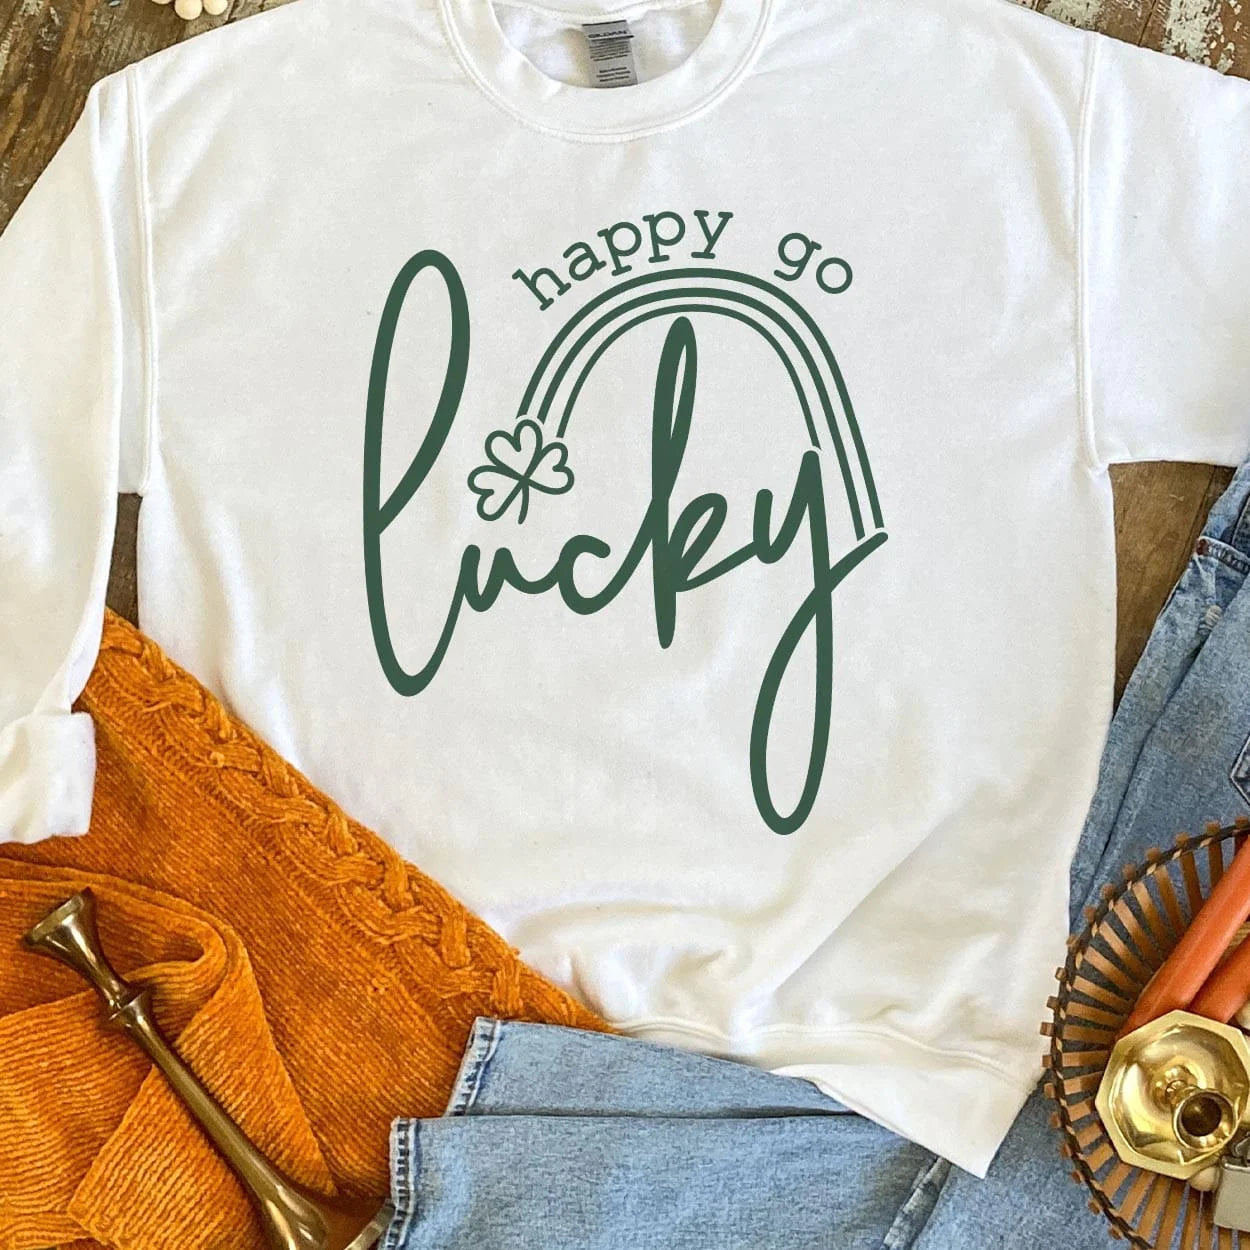 A white crew neck sweatshirt featuring the words "Happy go lucky". "Lucky" being in the center in cursive while "happy go" is above "lucky" in a smaller font. Between the two is a small rainbow with a clover at the end. Item is pictured on a brown background.